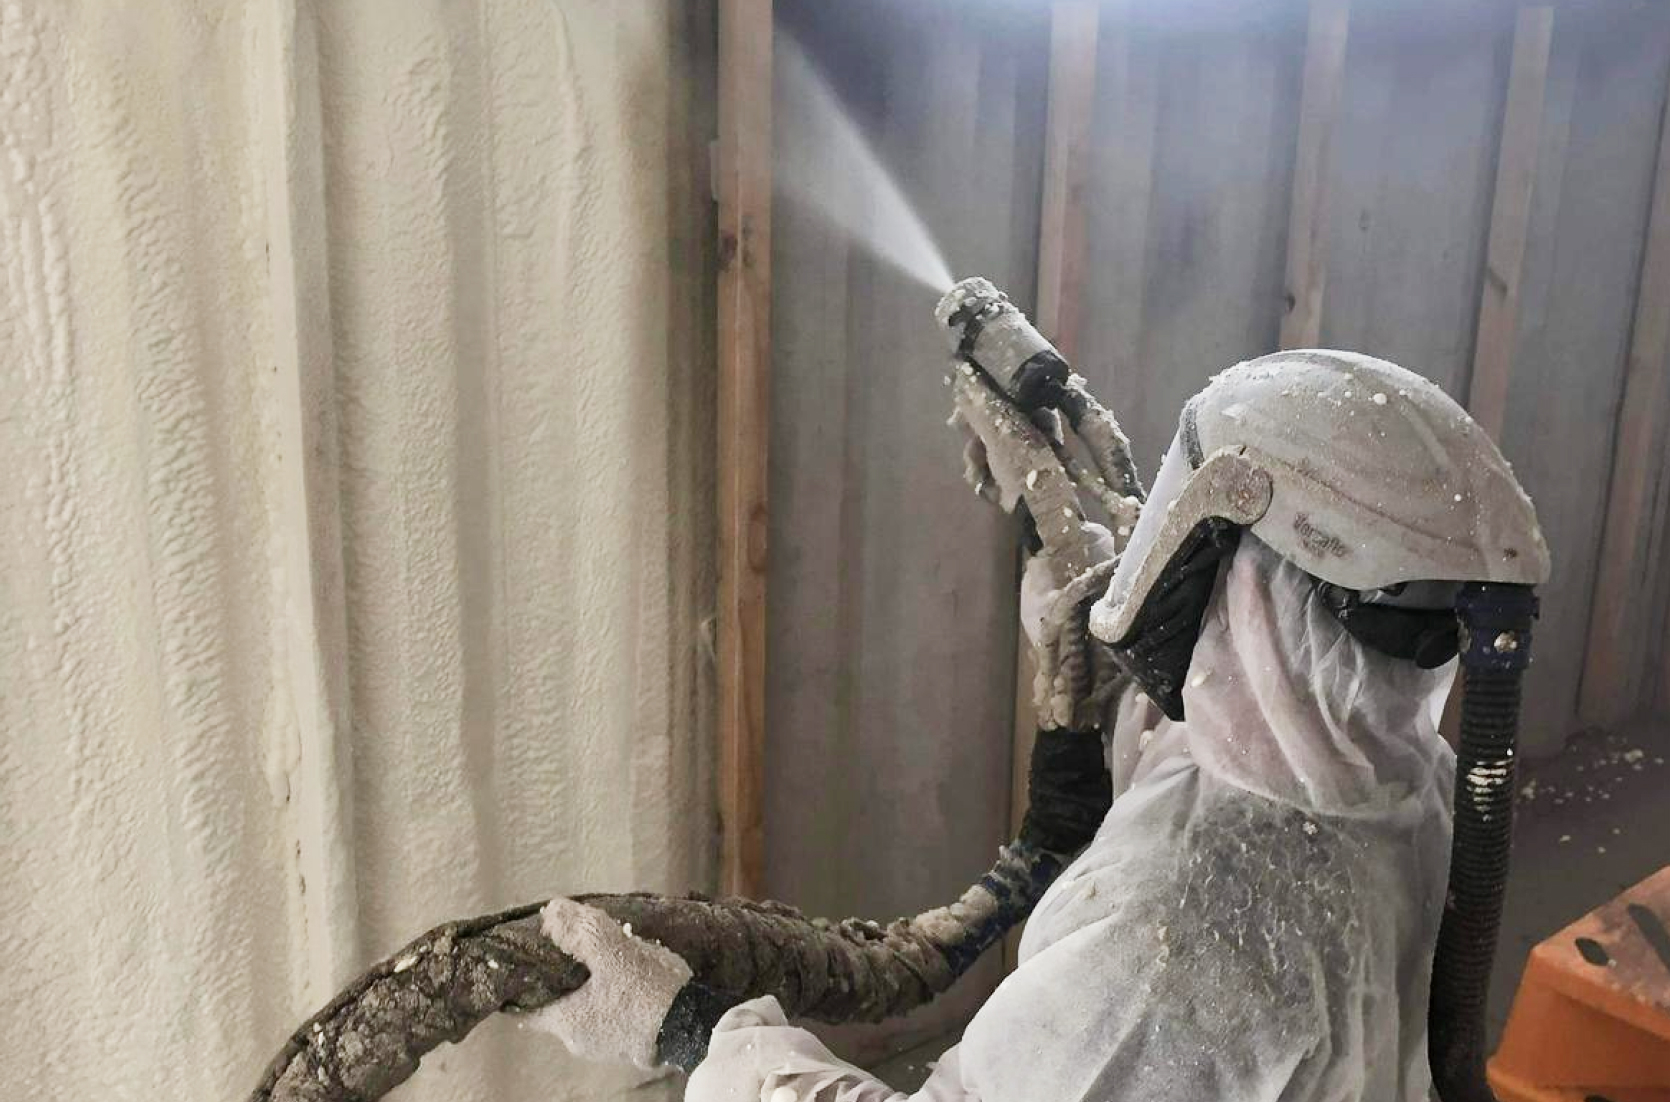 Person wearing PPE, spraying a wall